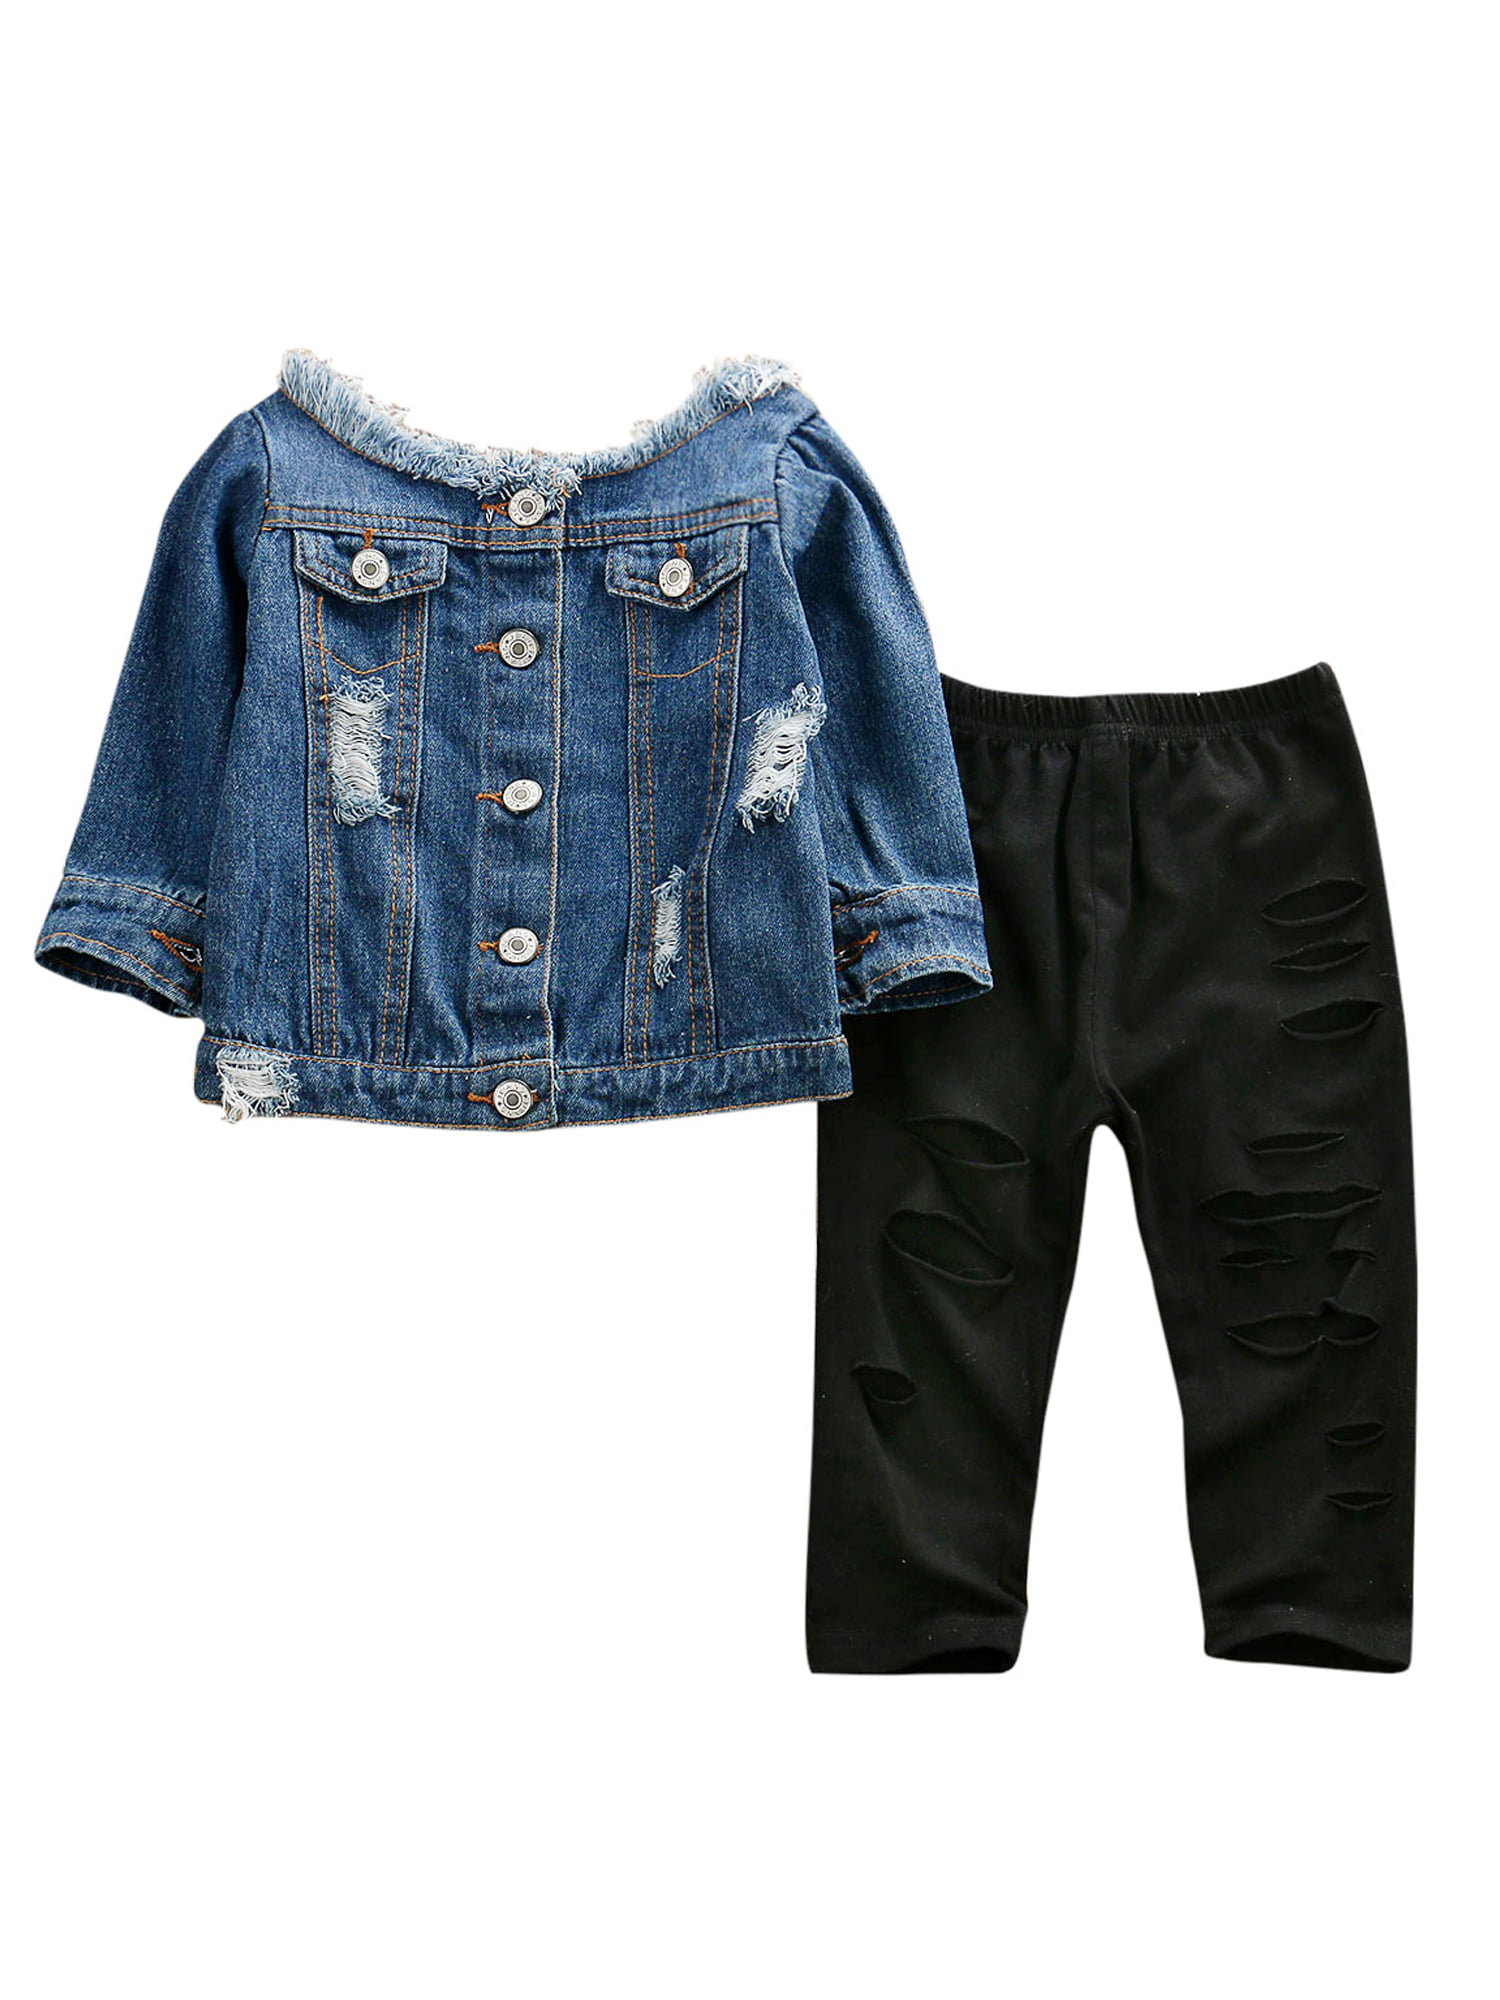 Toddler Boy 2pc Jean Style Outfit Jacket+Jean casual Gift Party Size 1-6 years 